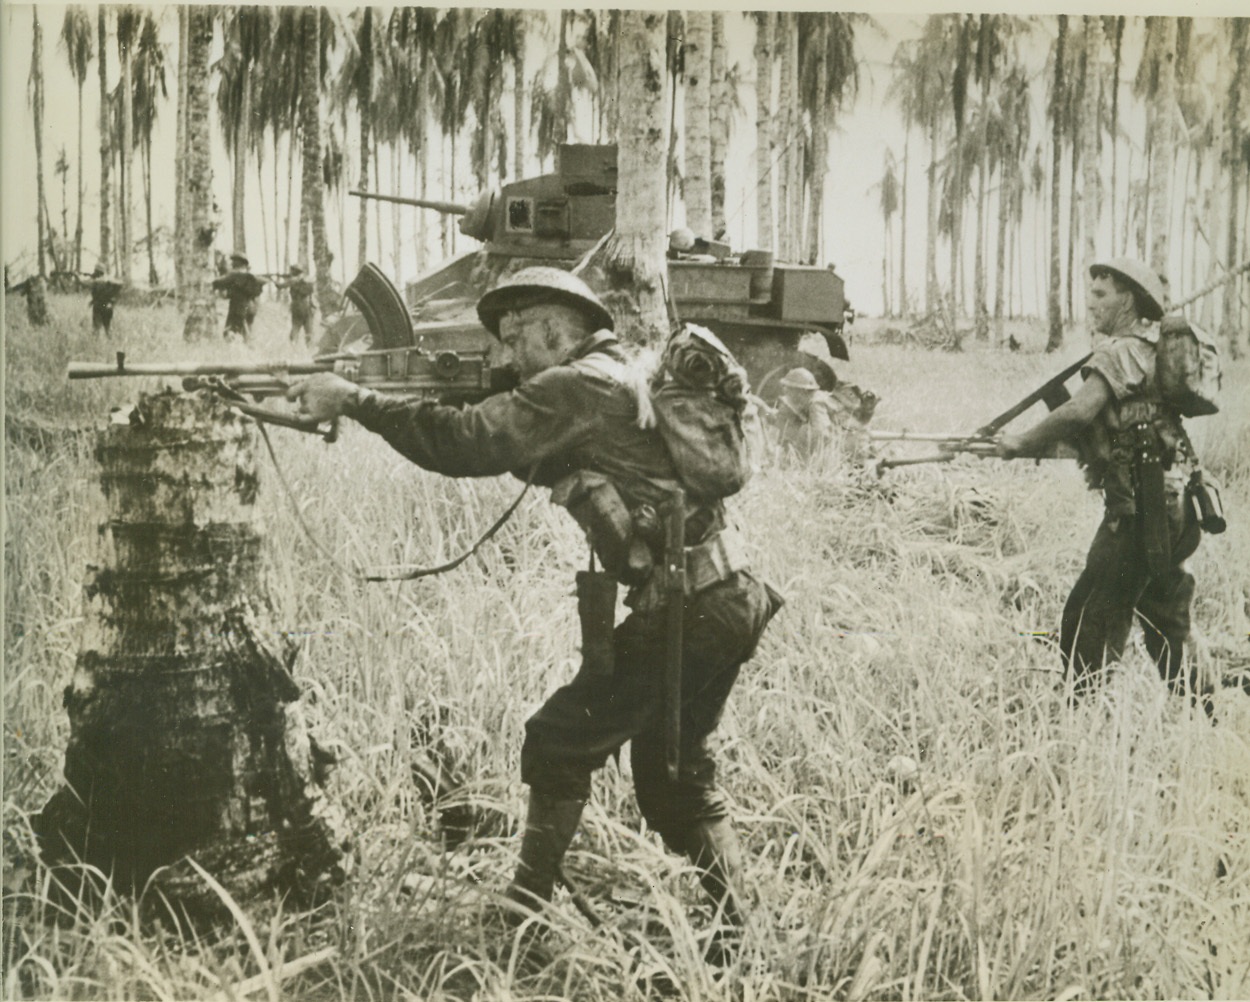 Aussies Stump Japs at Buna, 2/8/1943. New Guinea – A line of Australian troops beside a tank are firing on 25 Japs fleeing from a wrecked pillbox 150 yards away. One of the soldiers rests his gun on a tree stump to get a steadier aim. This is one of the first pictures showing the final assault on Buna. The troops exterminated Jap pillbox positions before rolling into Buna. Credit: (ACME);